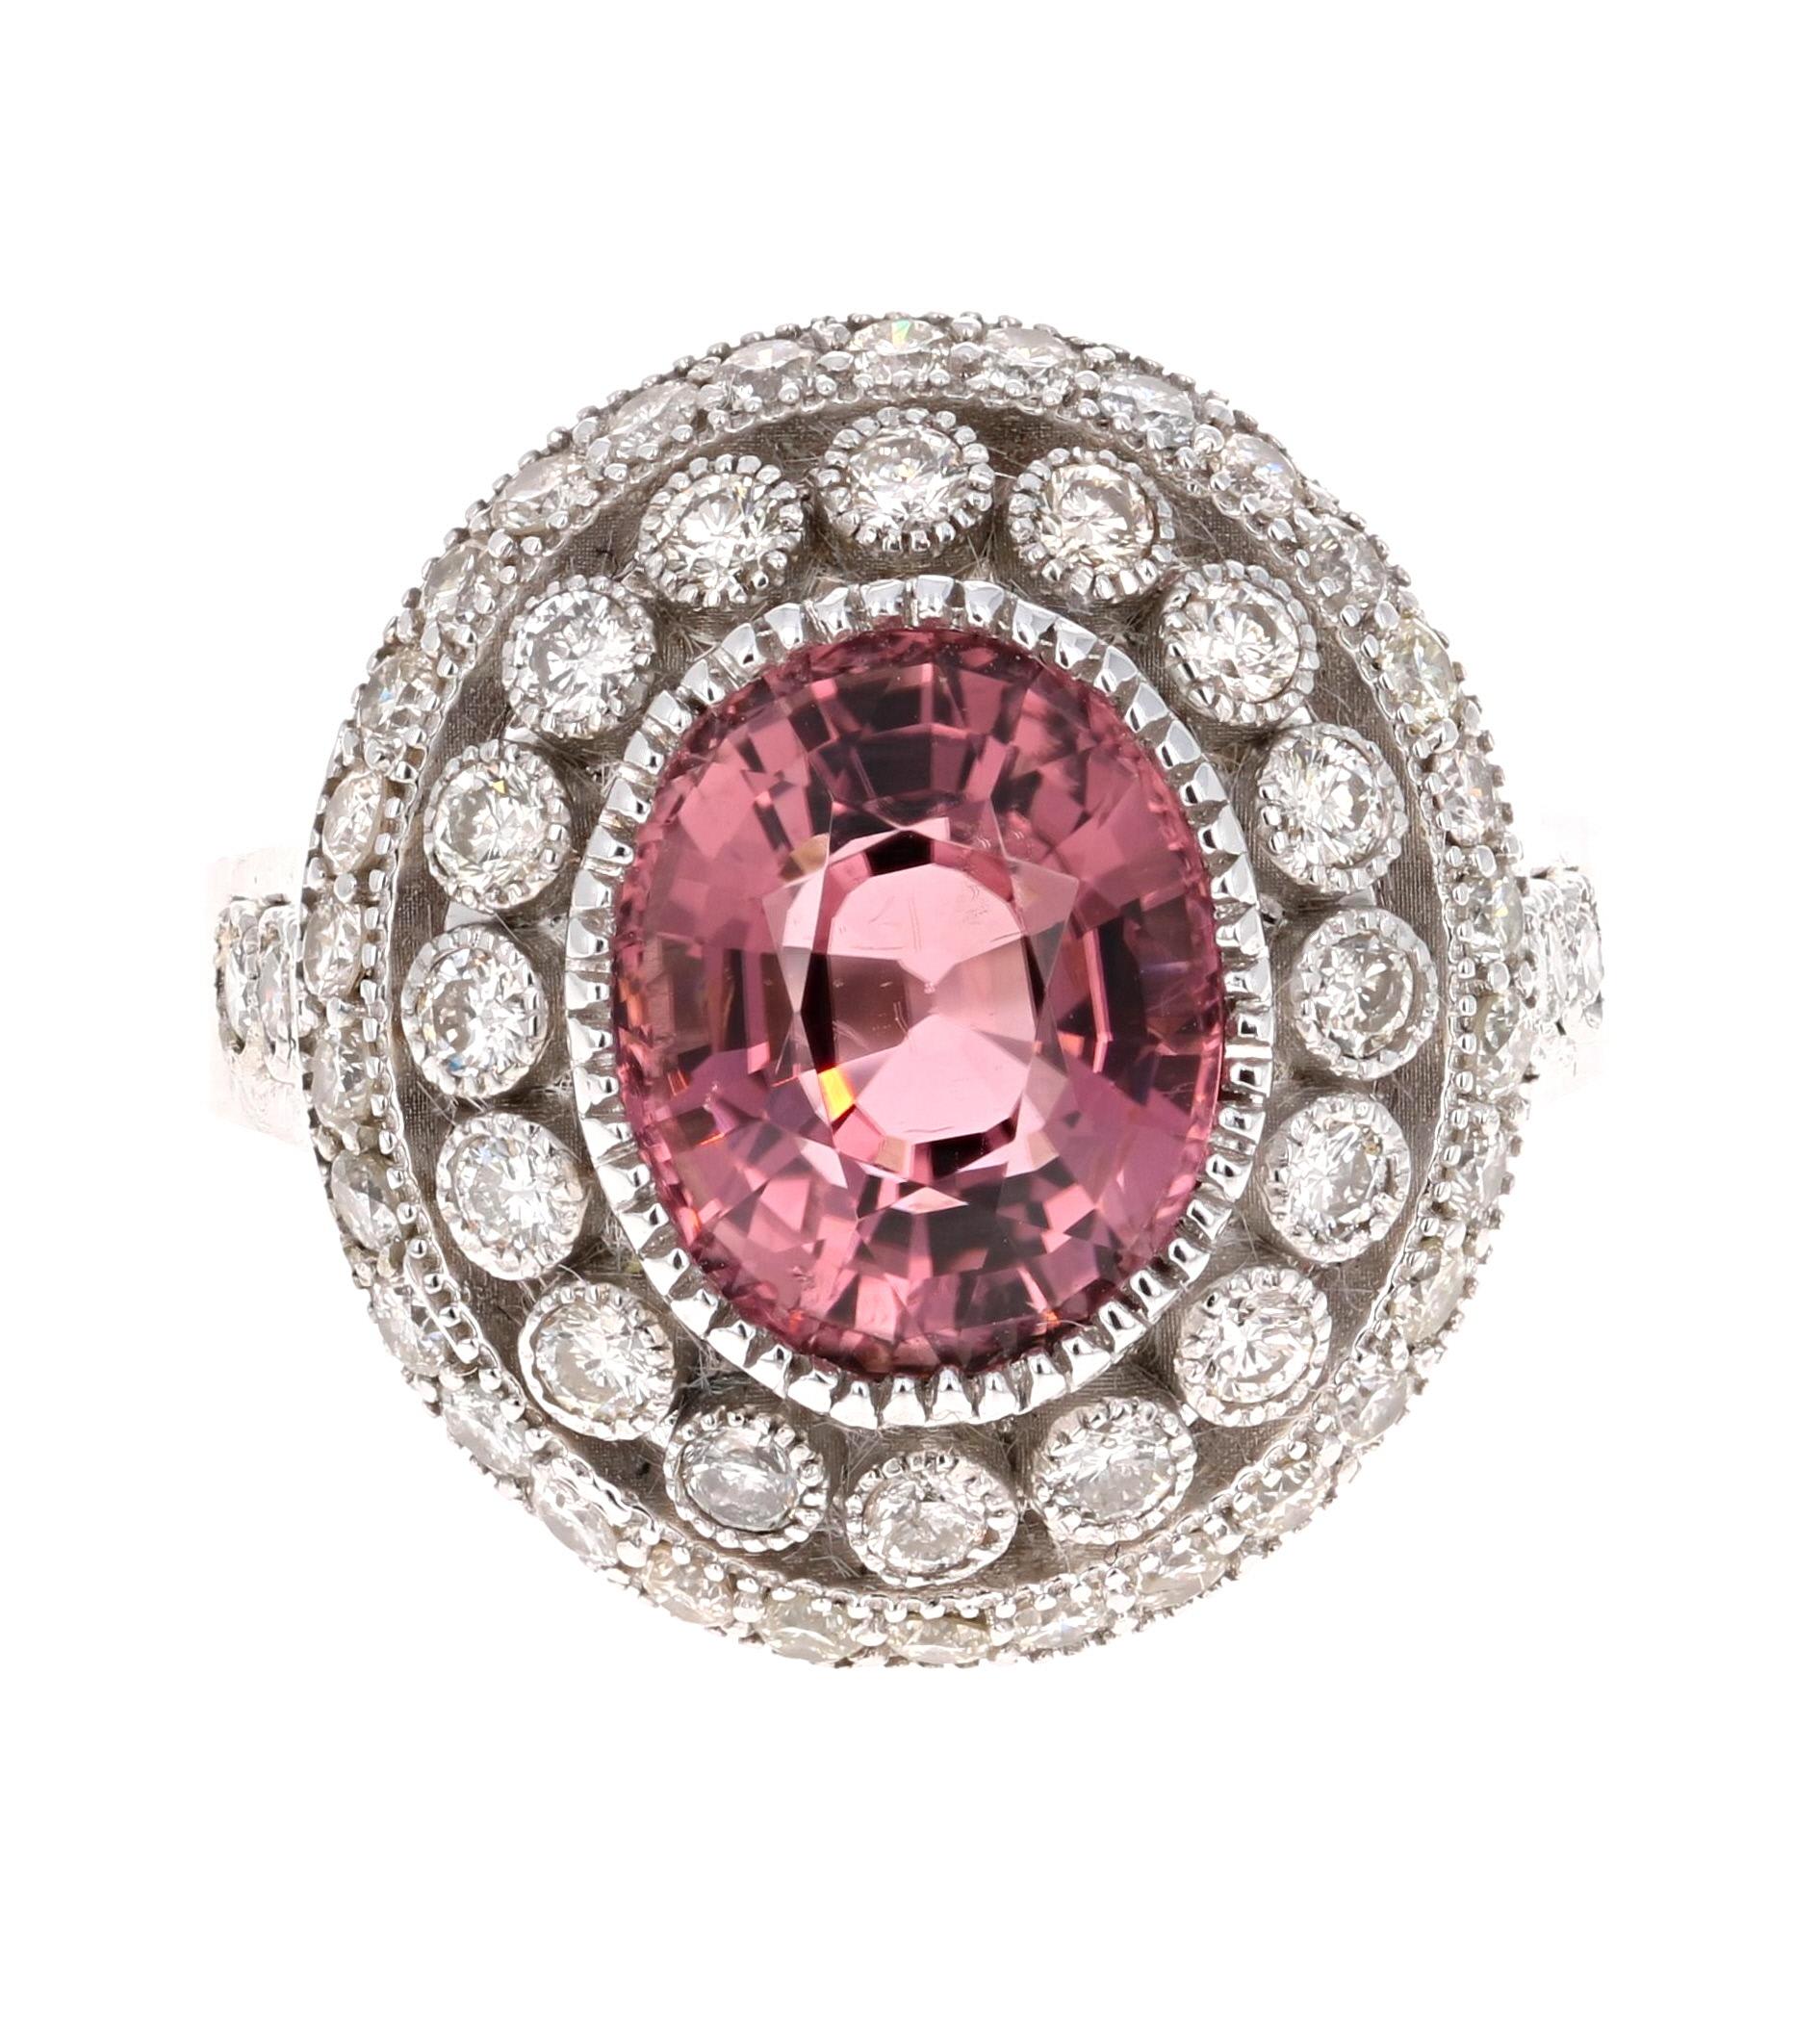 This ring has a beautiful setting that will look gorgeous on any hand that loves to wear antique/vintage style jewelry. It has a Oval Cut Pink Tourmaline weighing 3.41 Carats. There are 52 Round Cut Diamonds beautifully set that weigh 1.06 Carats.